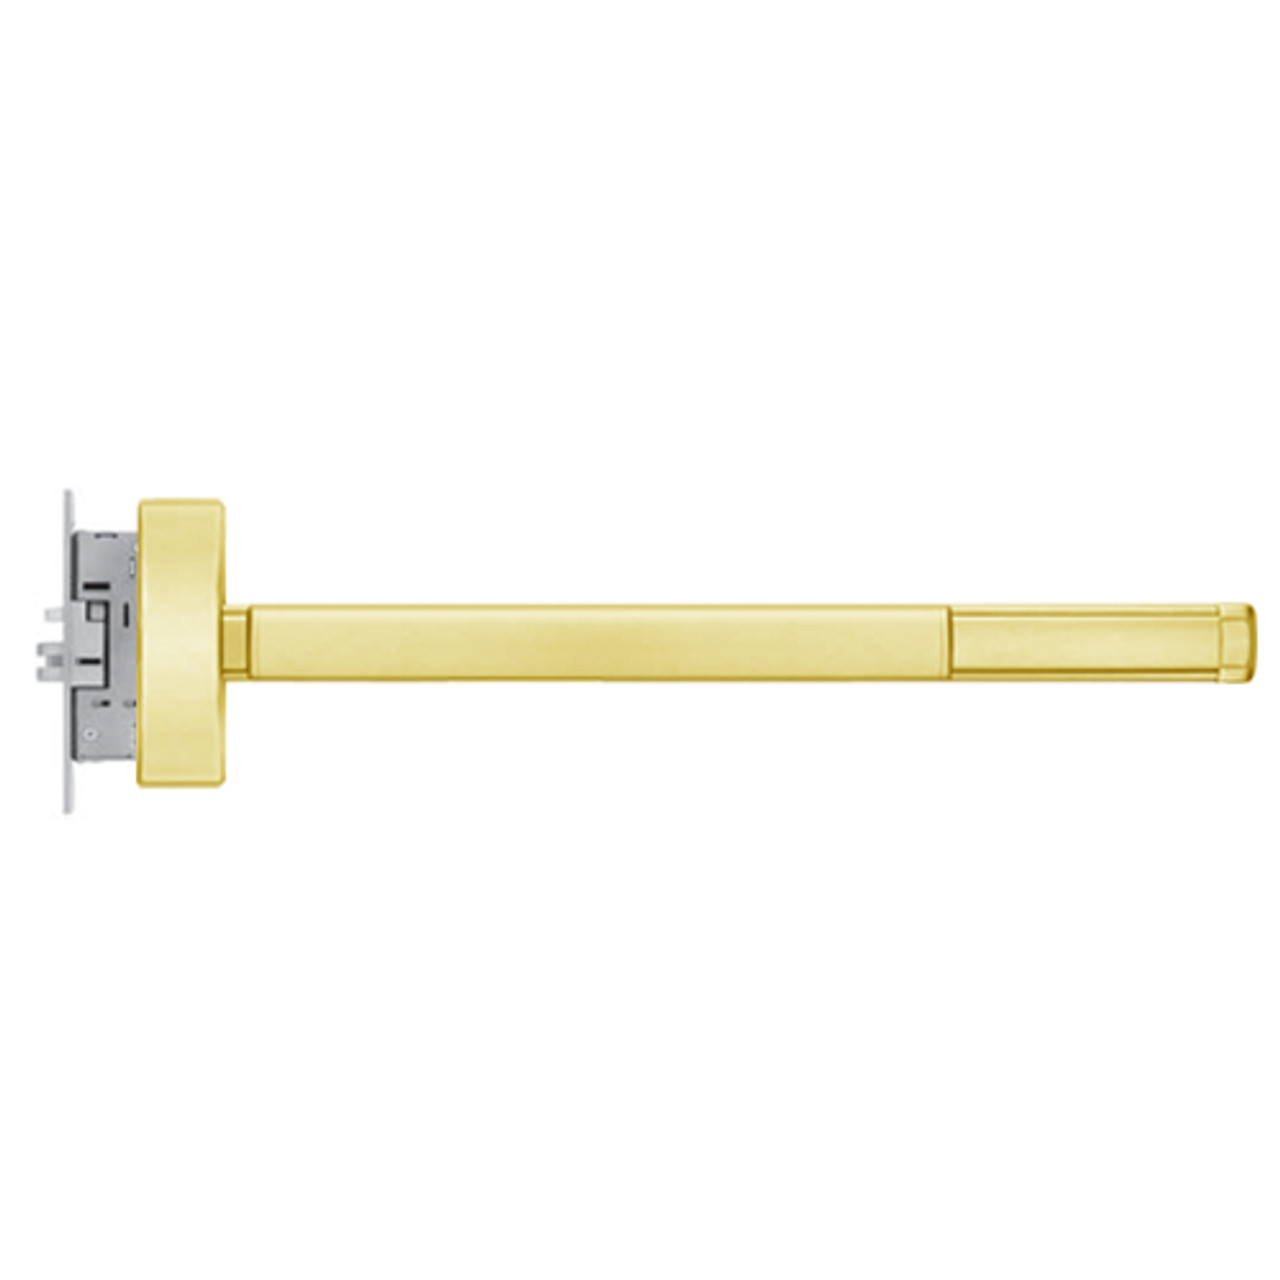 FL2305-RHR-605-36 PHI 2300 Series Fire Rated Apex Mortise Exit Device Prepped for Key Controls Thumb Piece in Bright Brass Finish